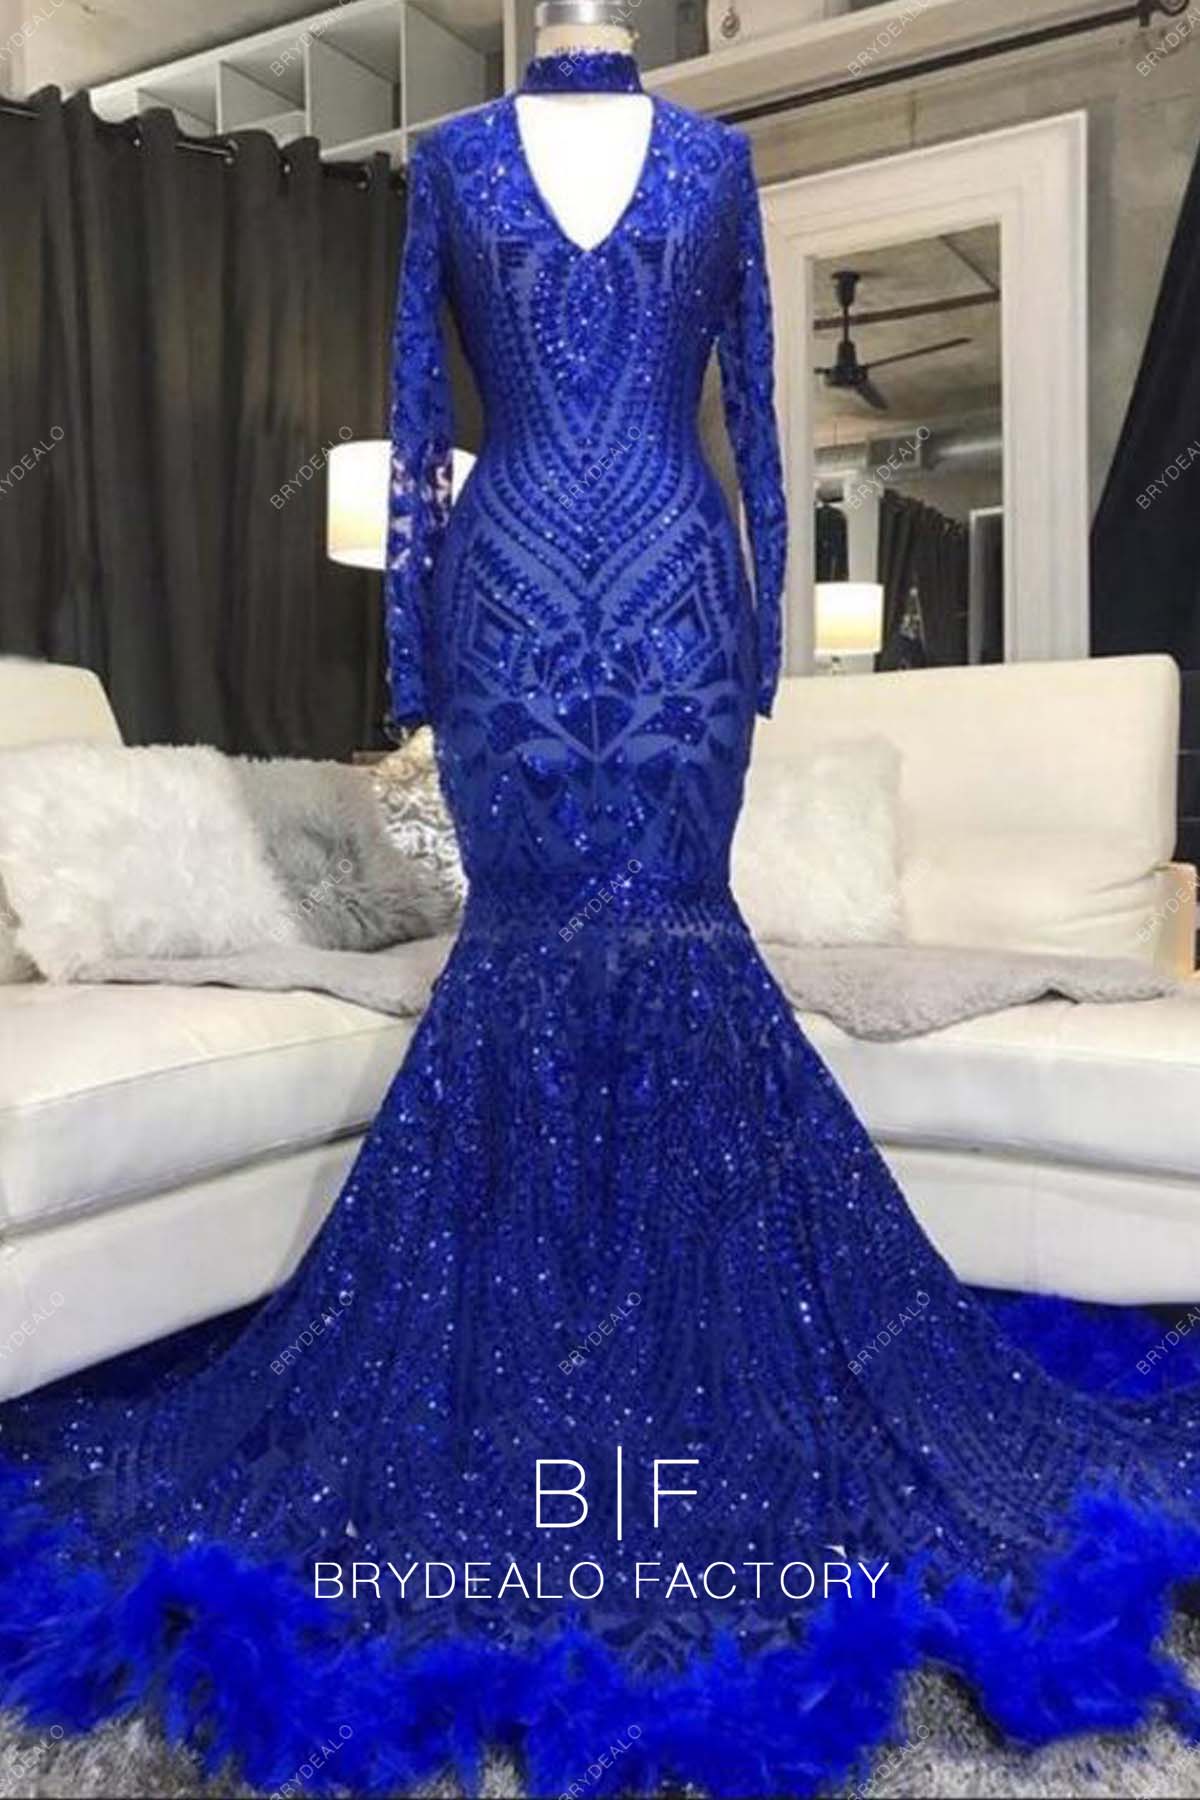 Royal Blue Sequin Choker Neck Feathered Mermaid Prom Dress